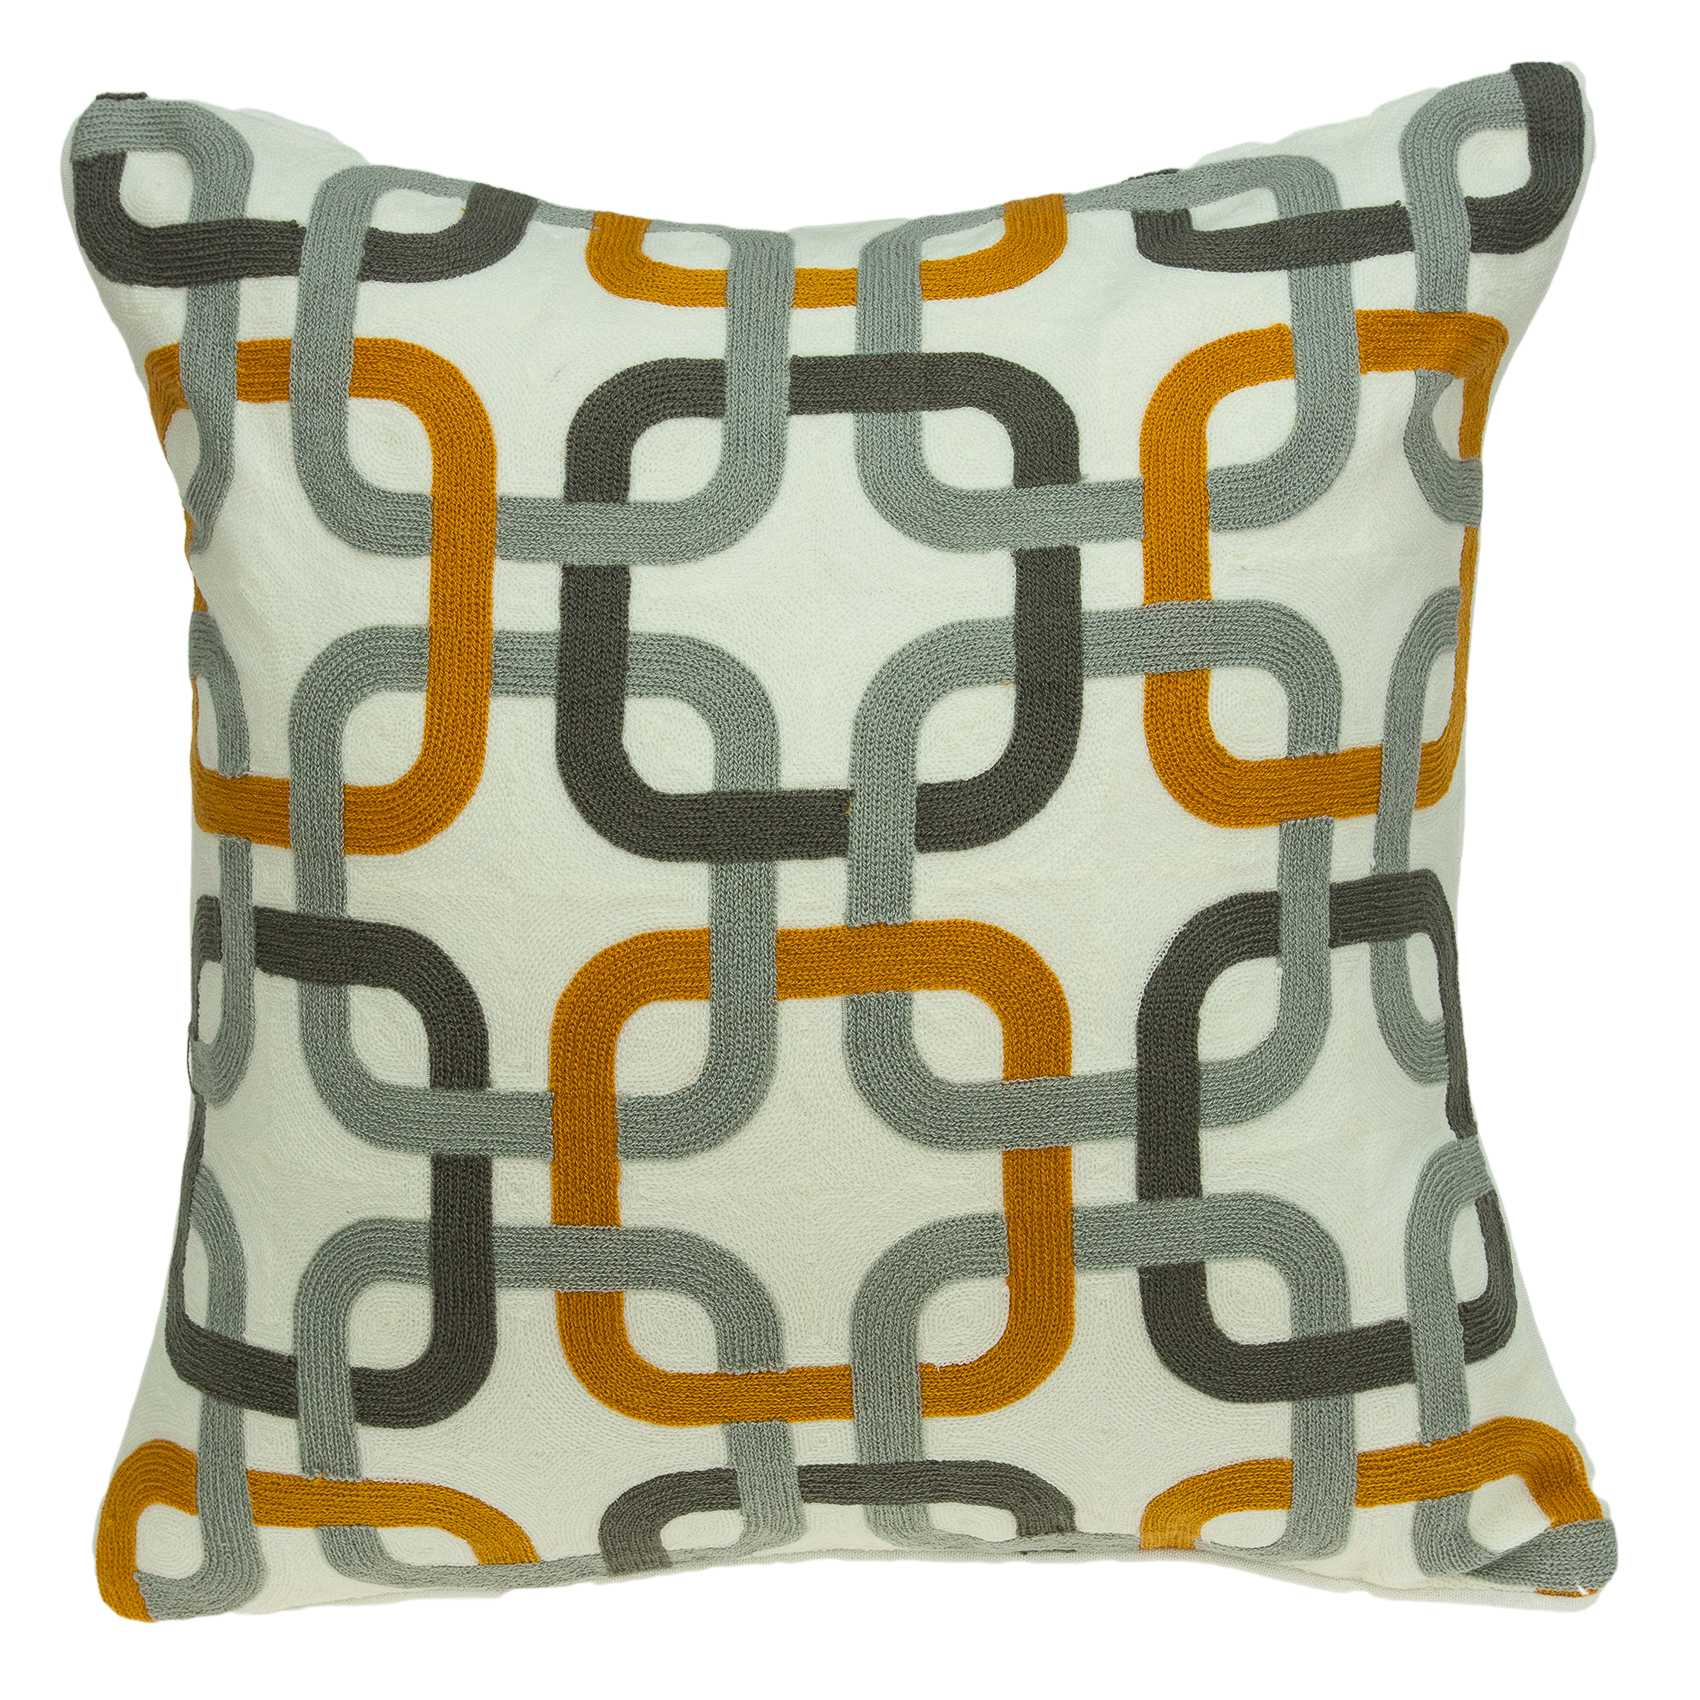 20" x 0.5" x 20" Transitional Gray, Orange & White Accent Pillow Cover